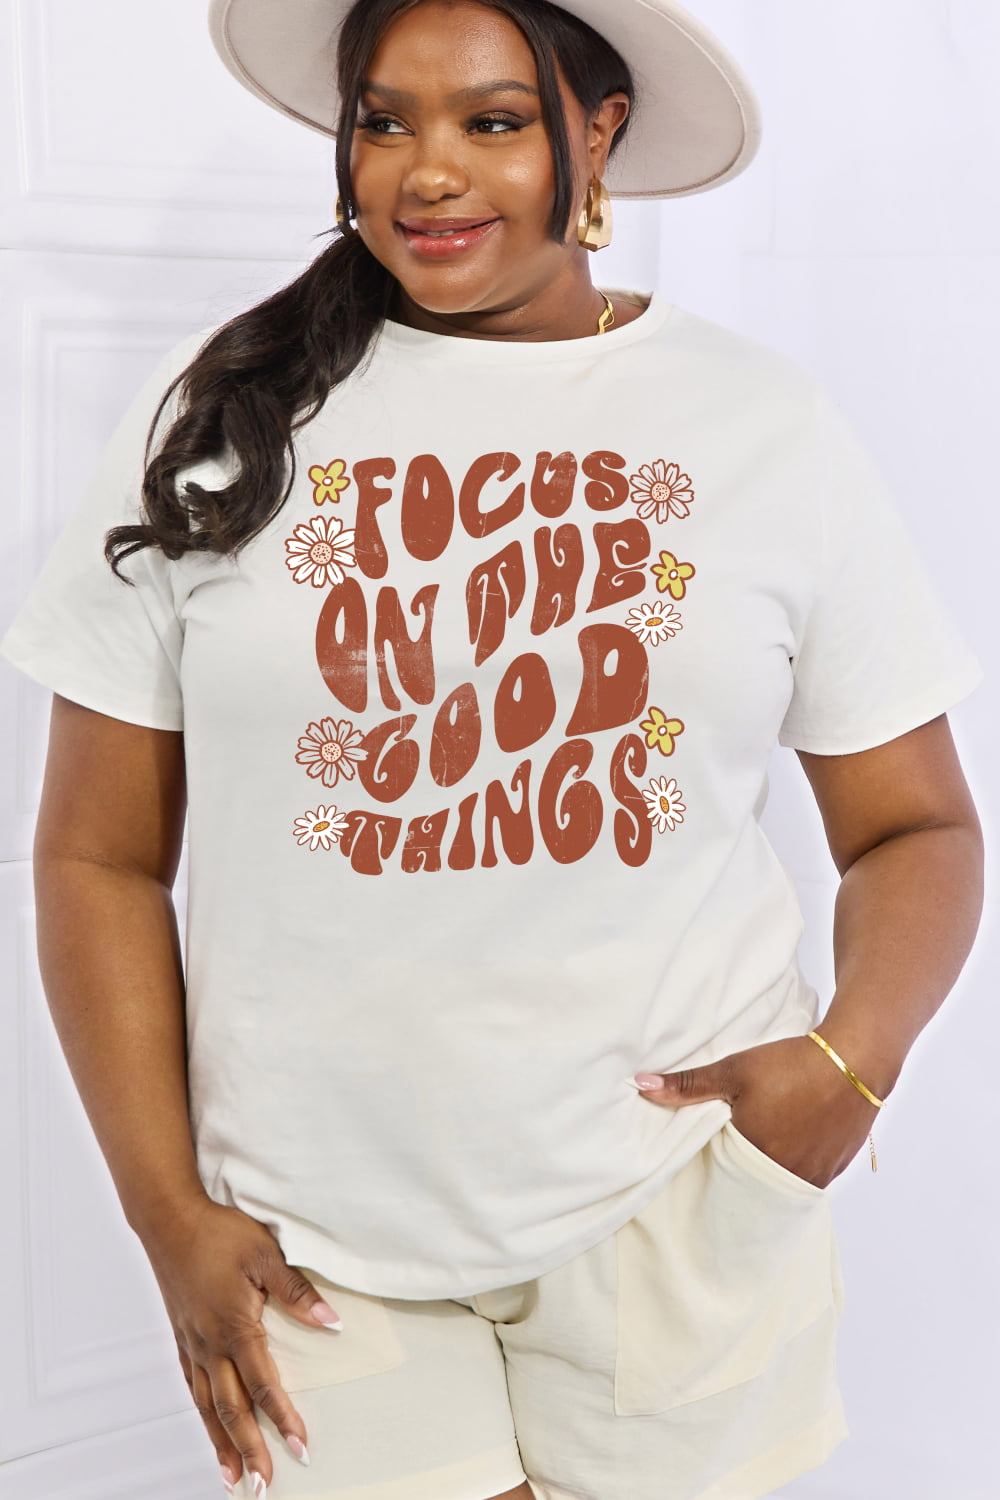 FOCUS ON THE GOOD THINGS Graphic Cotton Tee - T-Shirts - Shirts & Tops - 5 - 2024